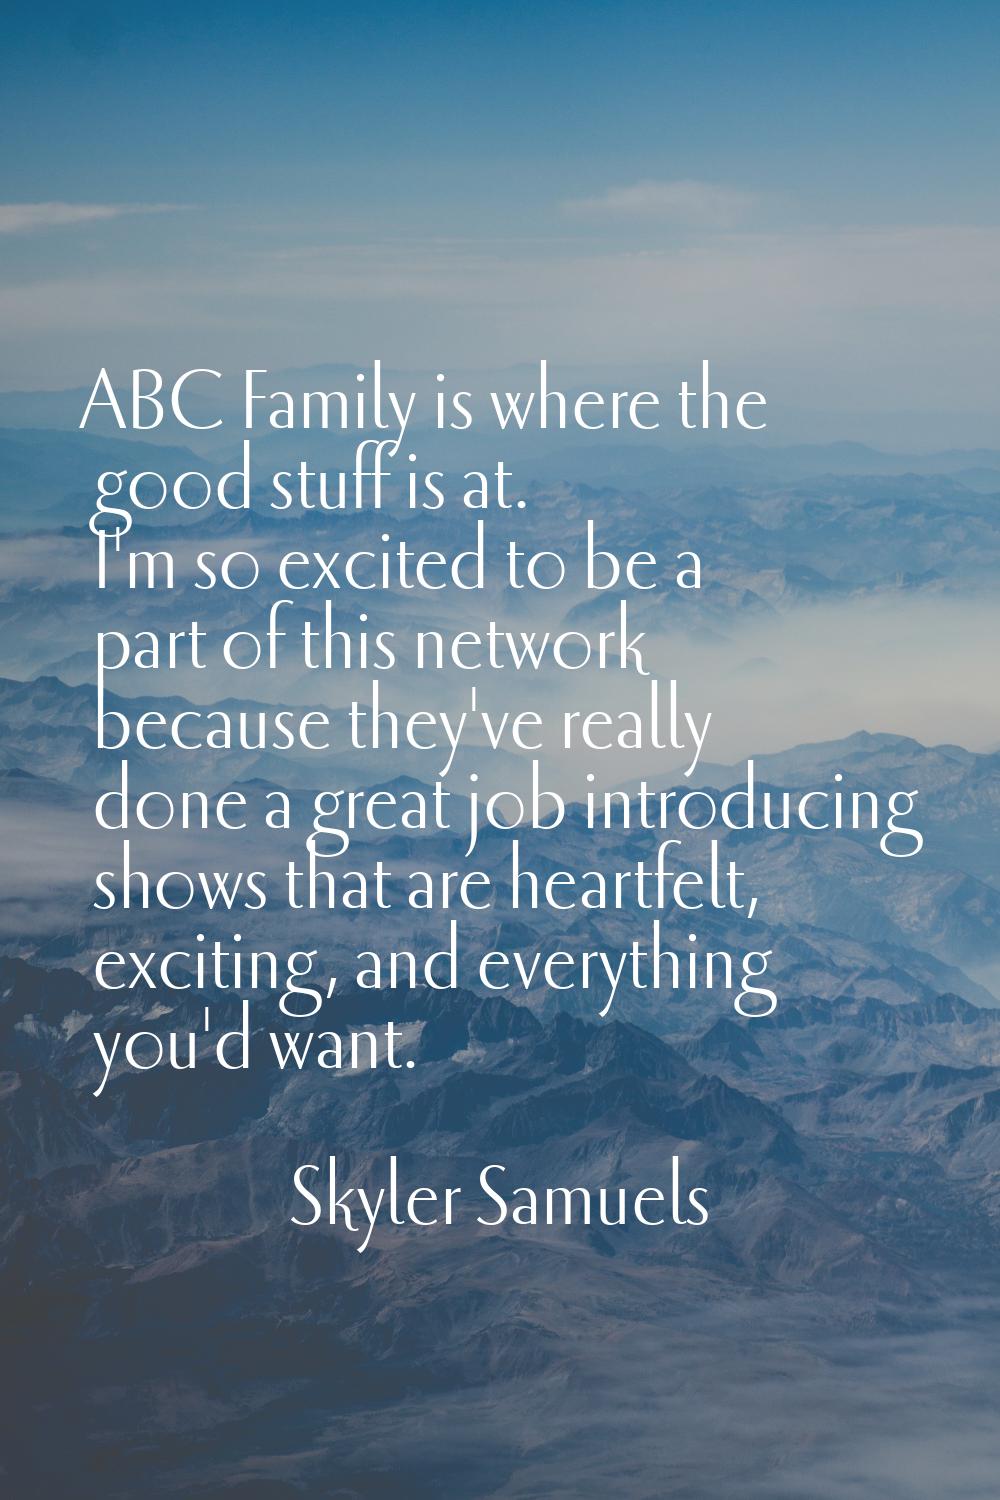 ABC Family is where the good stuff is at. I'm so excited to be a part of this network because they'